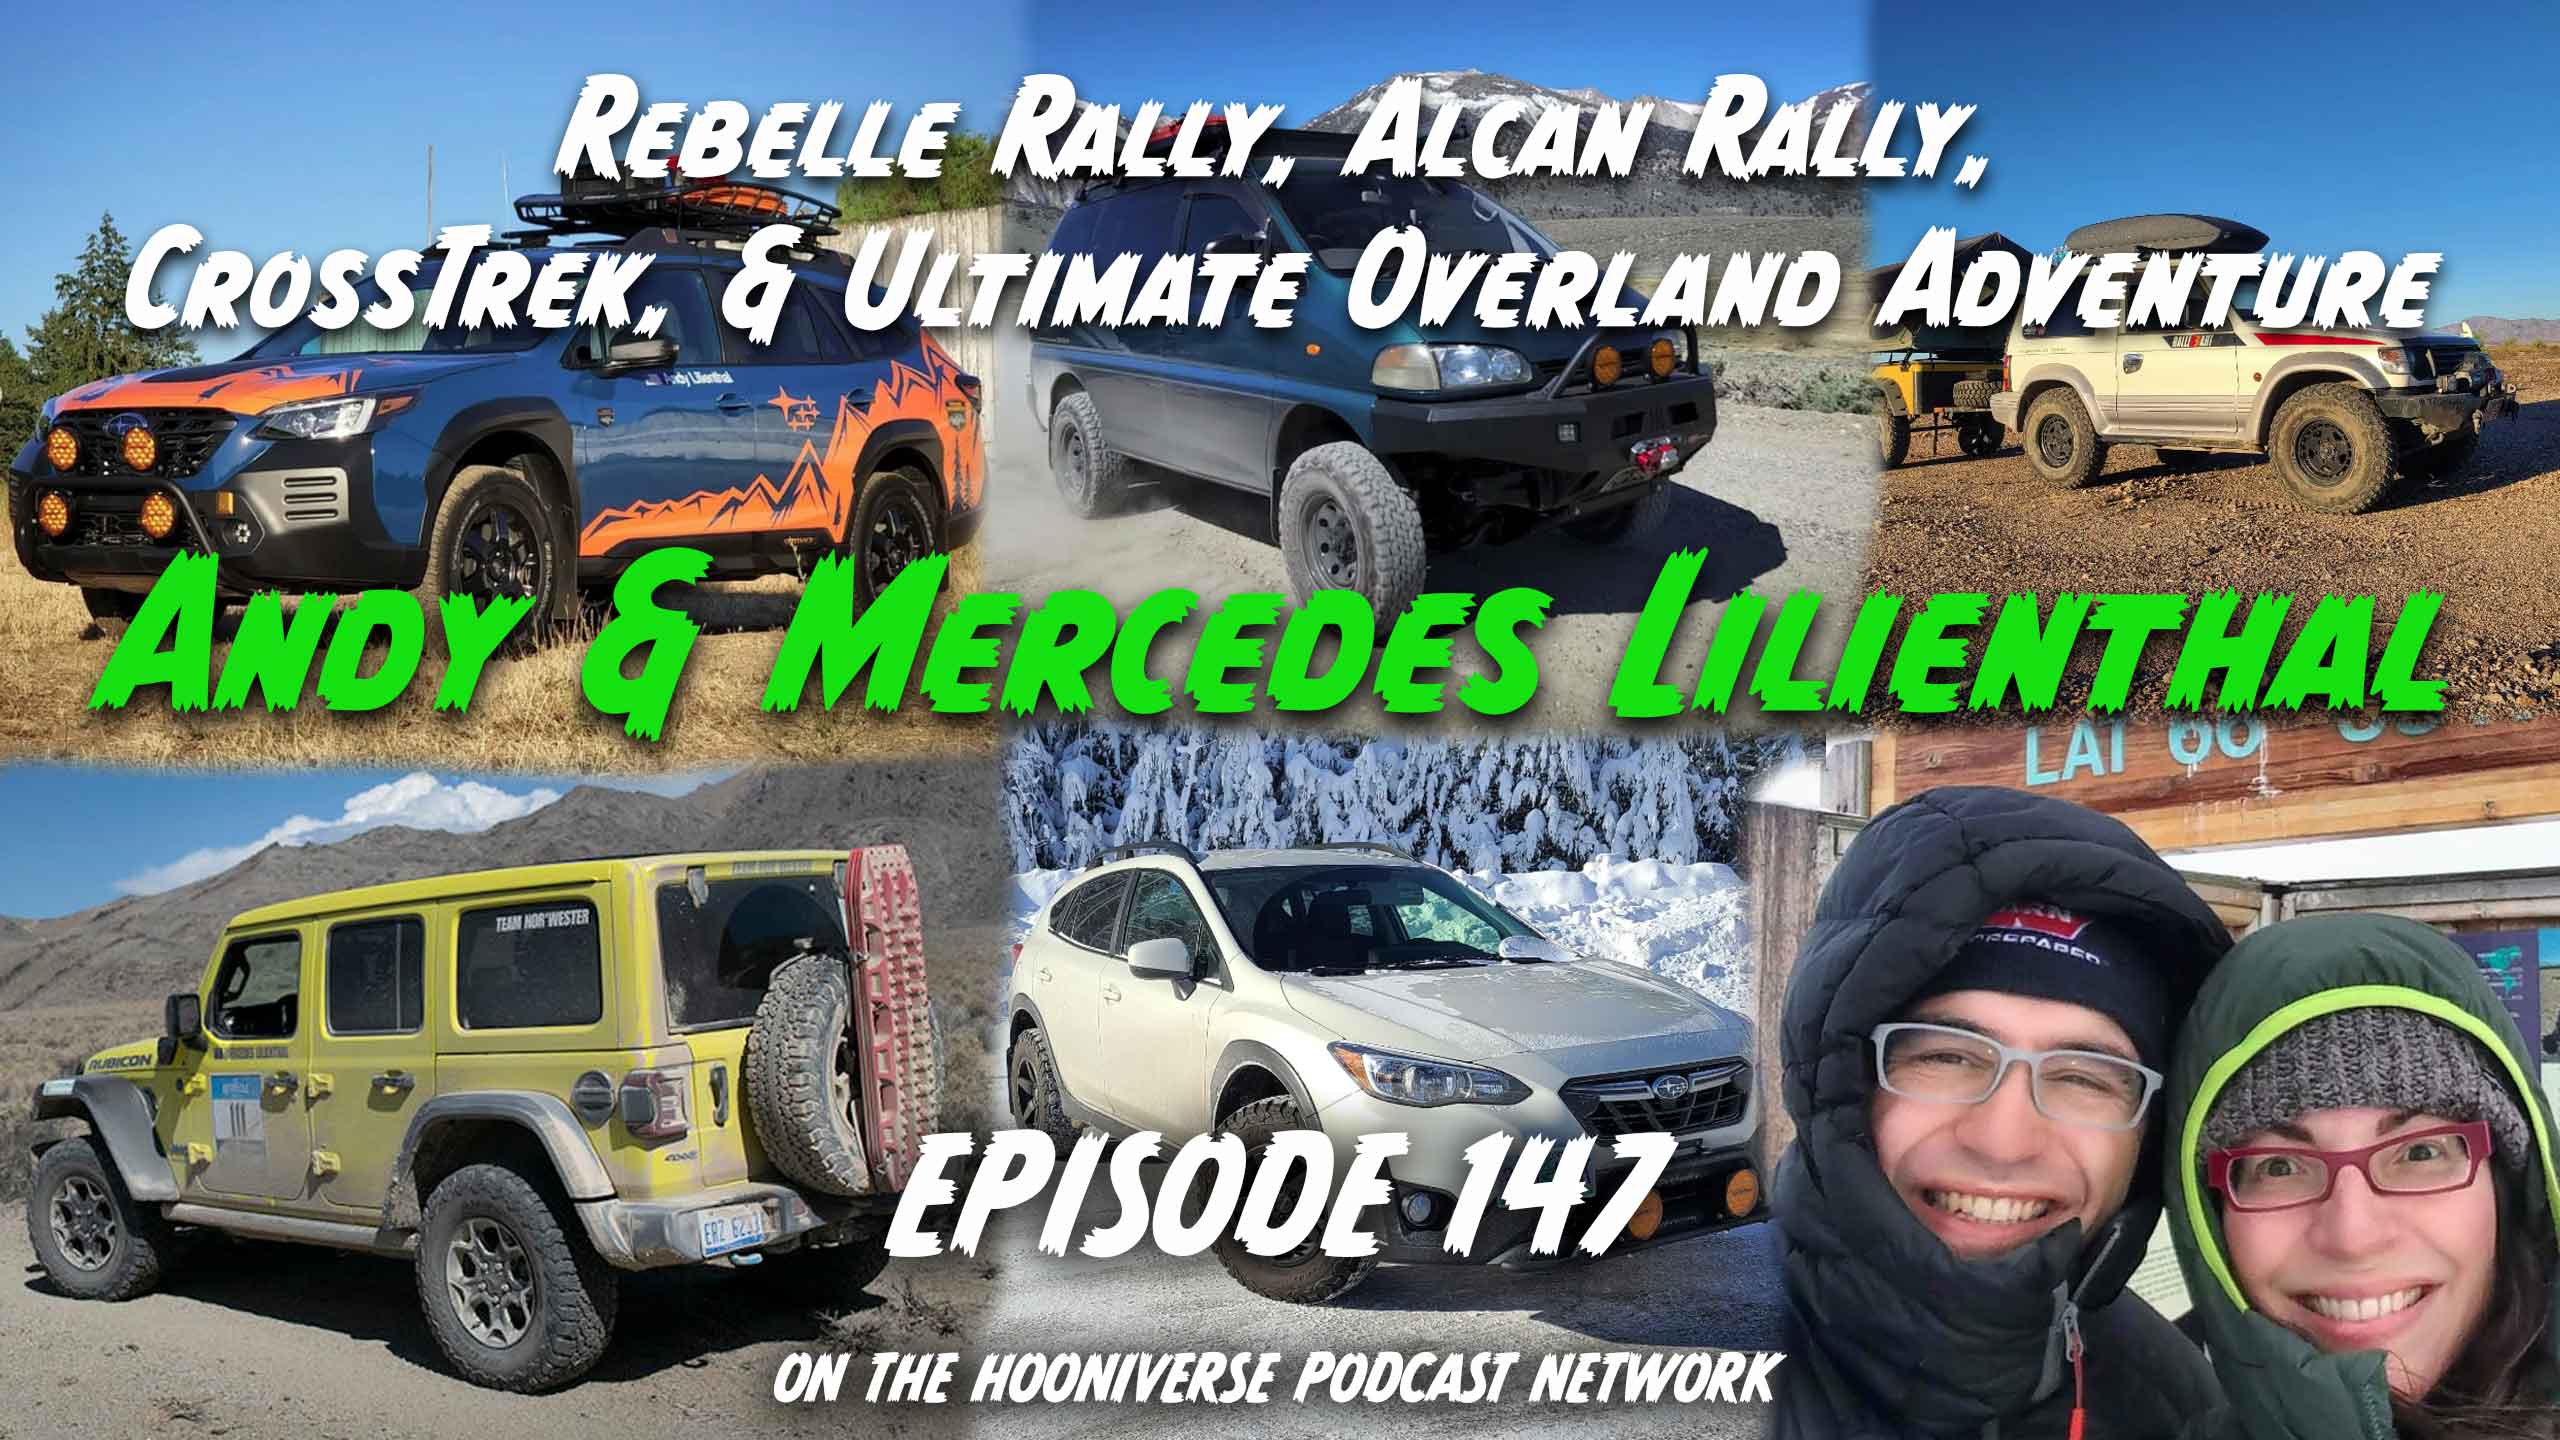 Andy-Mercedes-Lilienthal-Rebelle-Rally-Alcan-Rally-Overland-Pajero-Off-the-Road-Again-Episode-147